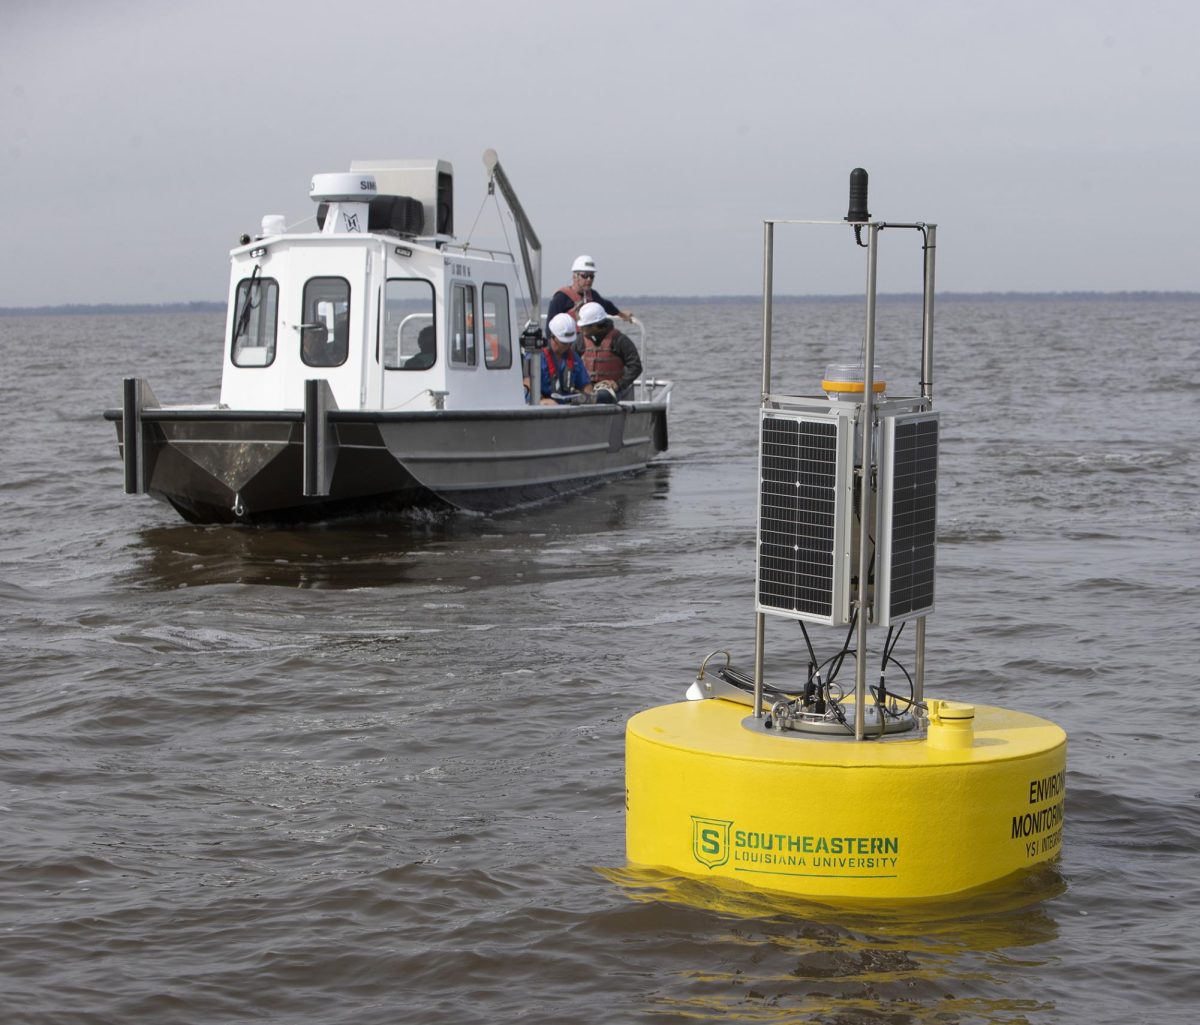 BUOY+DEPLOYMENT+%E2%80%93+Members+of+the+buoy+deployment+team+leave+the+area+after+the+deployment+of+one+of+four+buoys+in+Lake+Maurepas.+Scientists+from+Southeastern+Louisiana+University+will+be+monitoring+the+marine+life+populations+%28fishes%2C+crabs%2C+shrimp%29%2C+as+well+as+the+plant+life+in+the+surrounding+wetlands%2C+and+also+watching+and+studying+any+variations+in+water+quality+with+data+from+the+buoys.